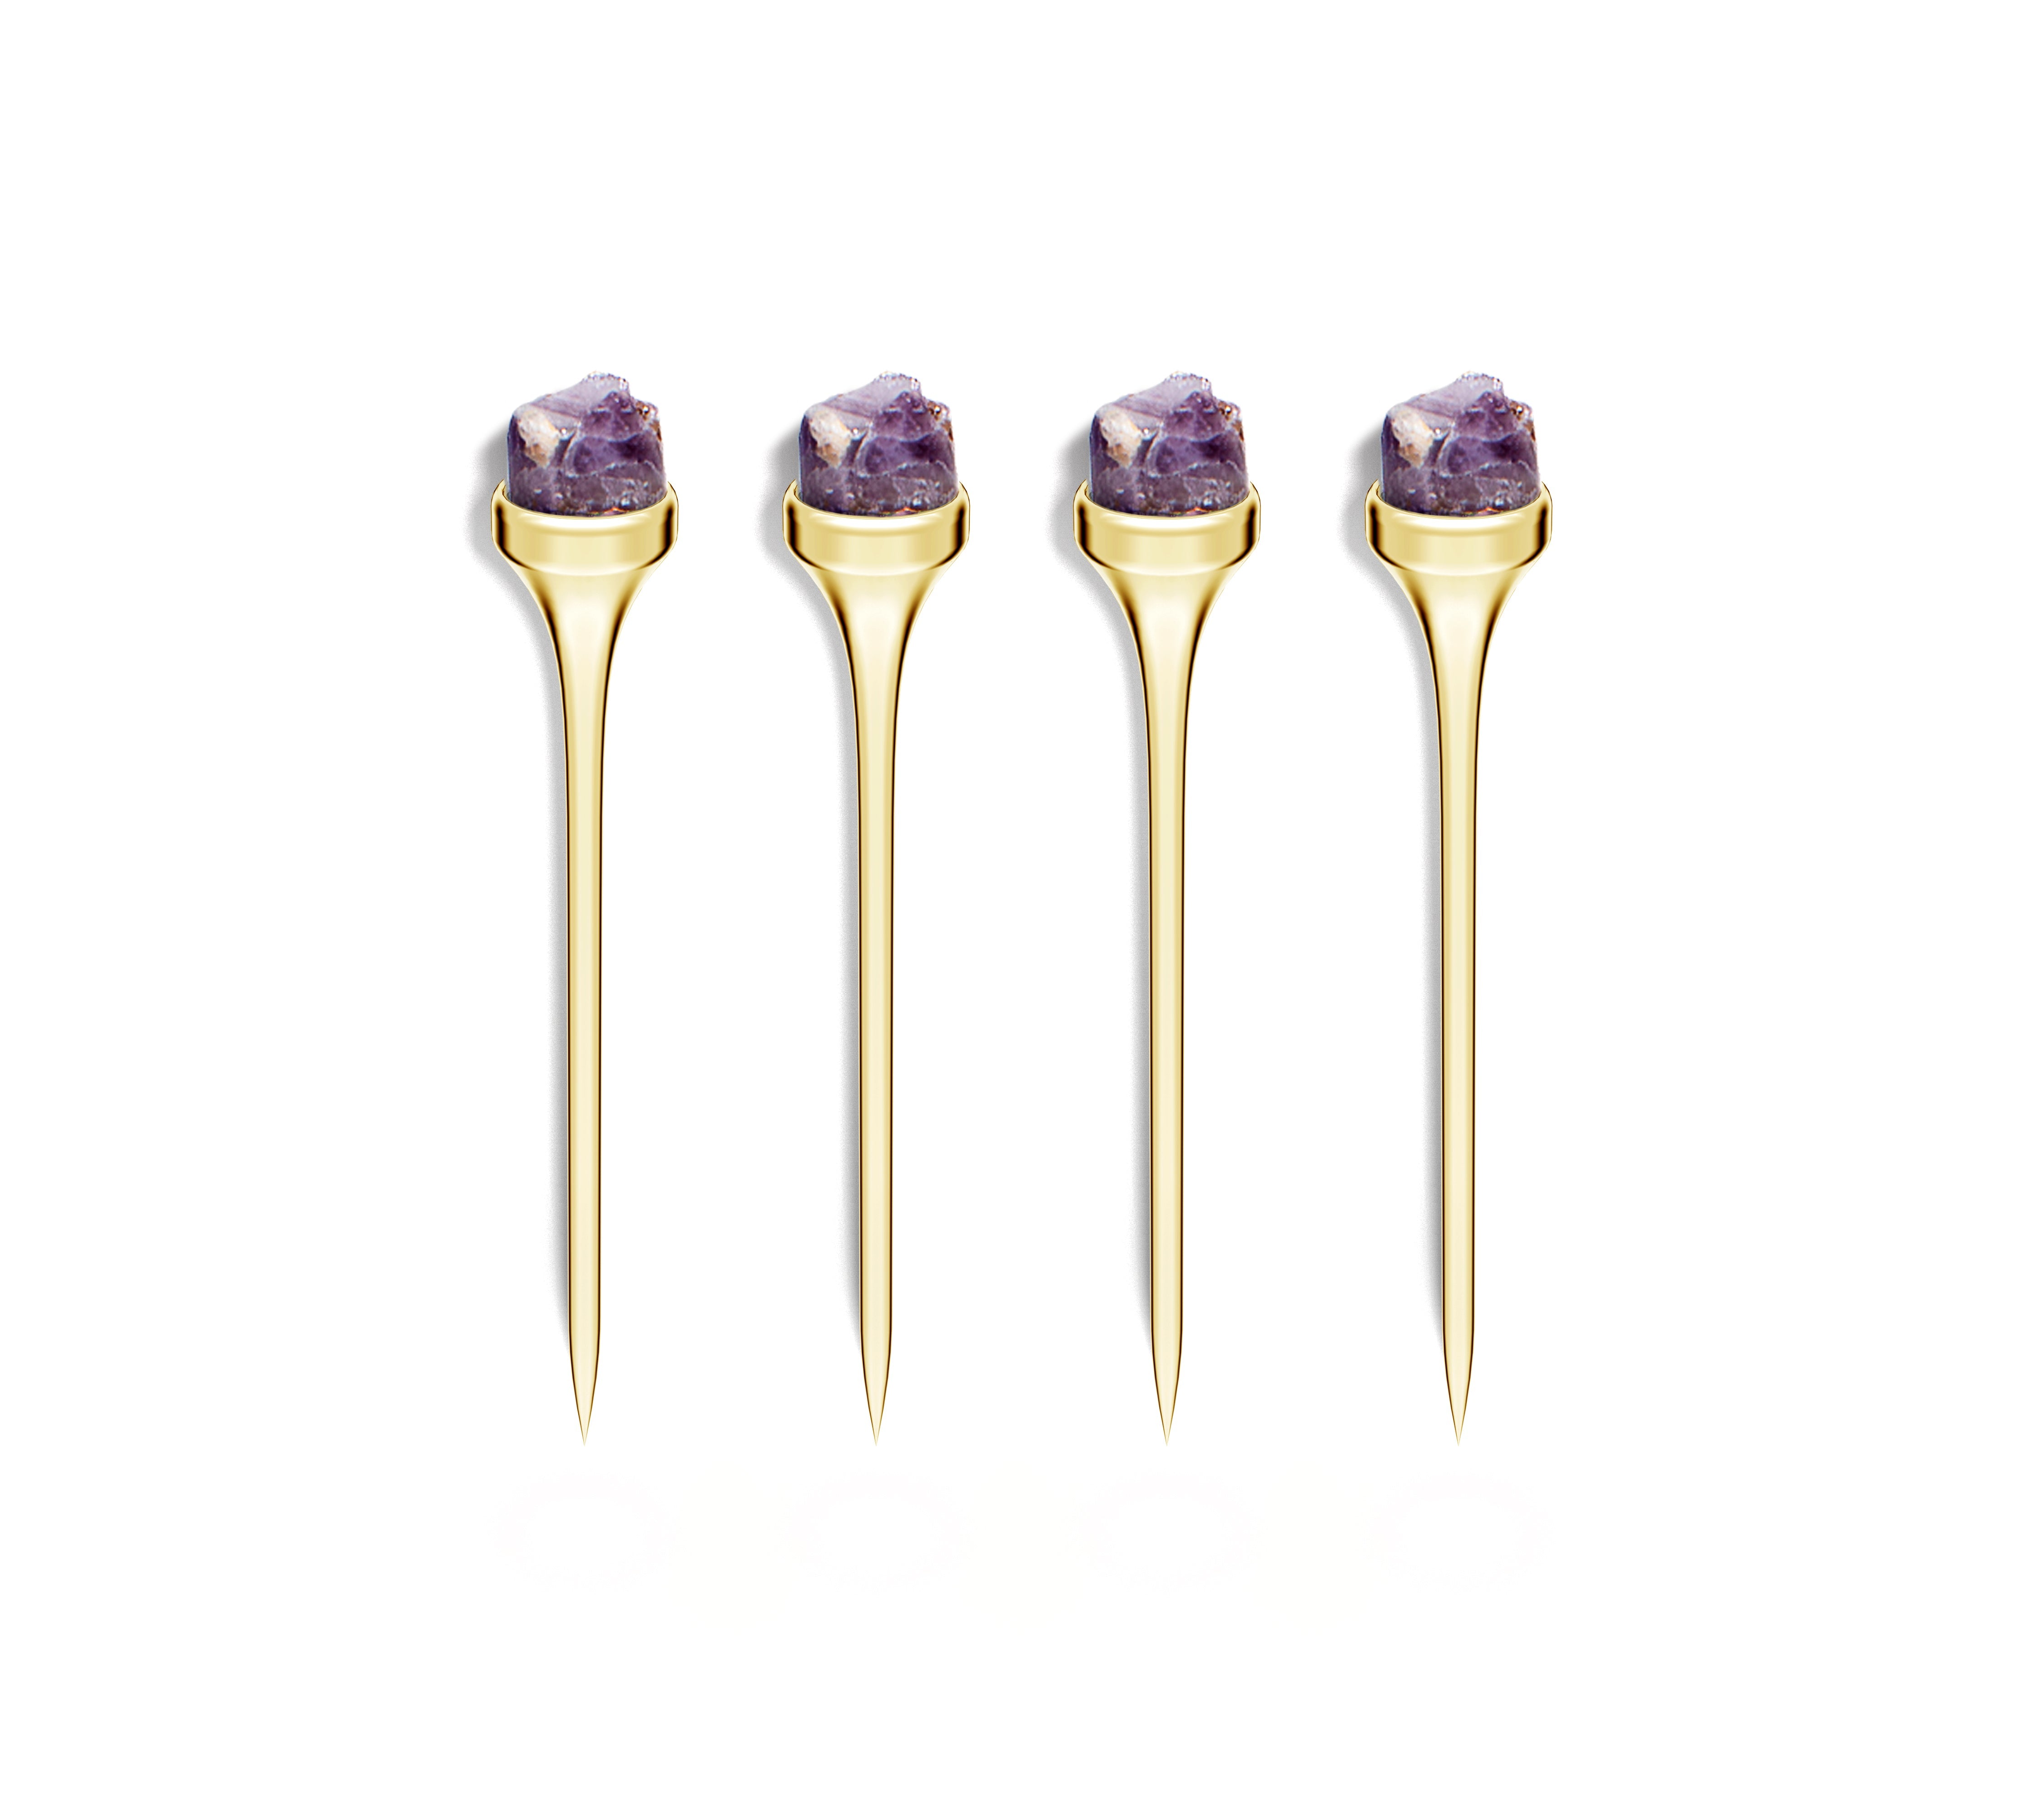 Hospitality Cocktail Picks, Gold & Amethyst Druze, Set of 4 by ANNA New York